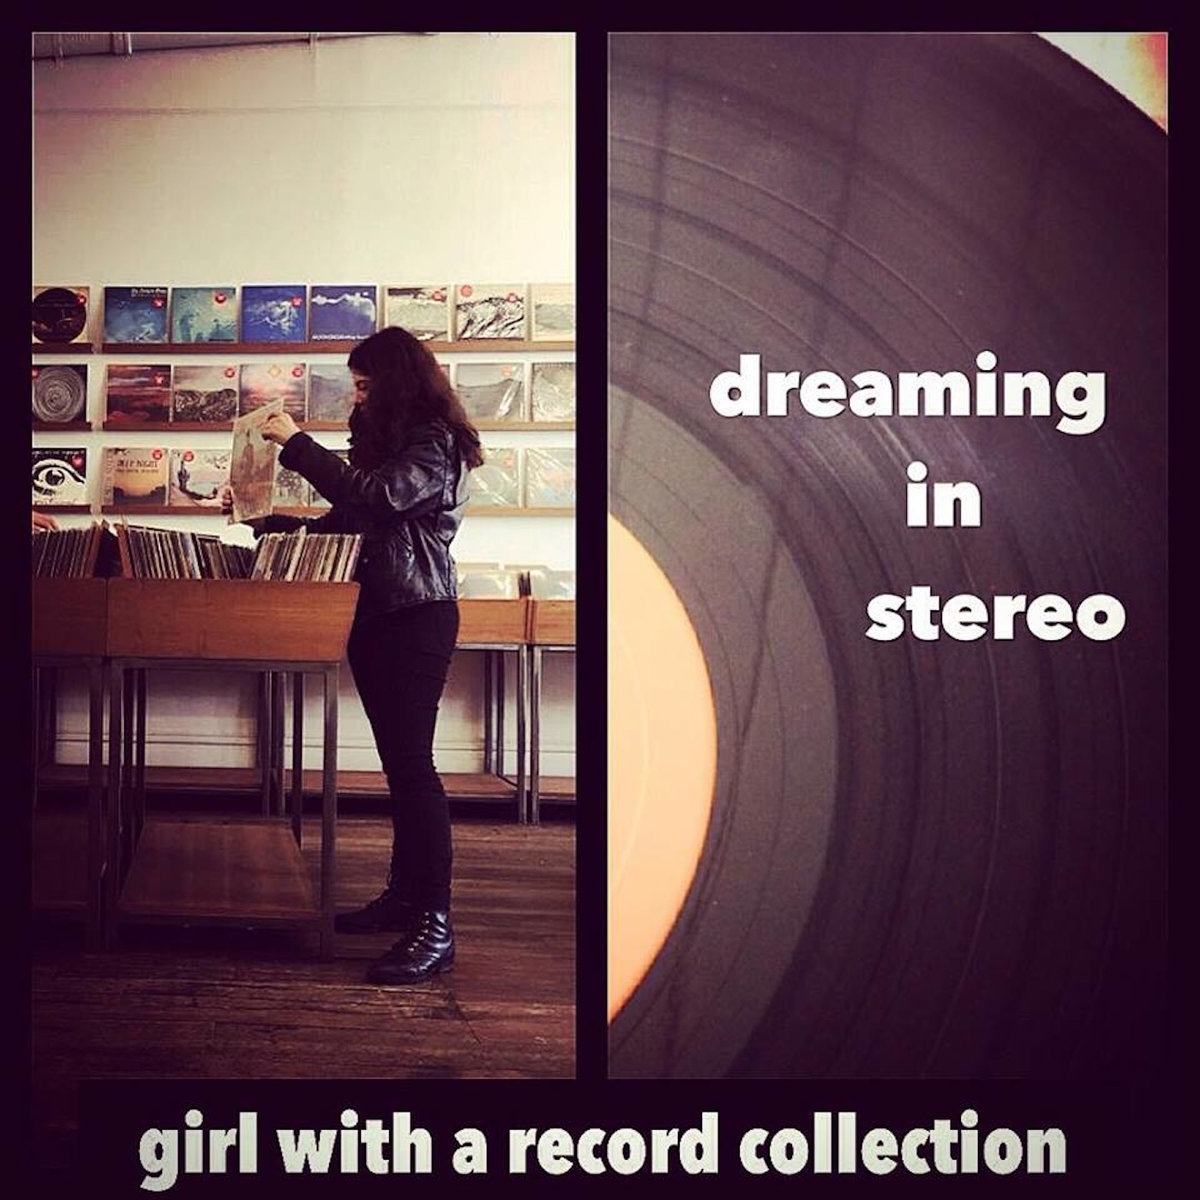 dreaming in stereo girl with a record collection